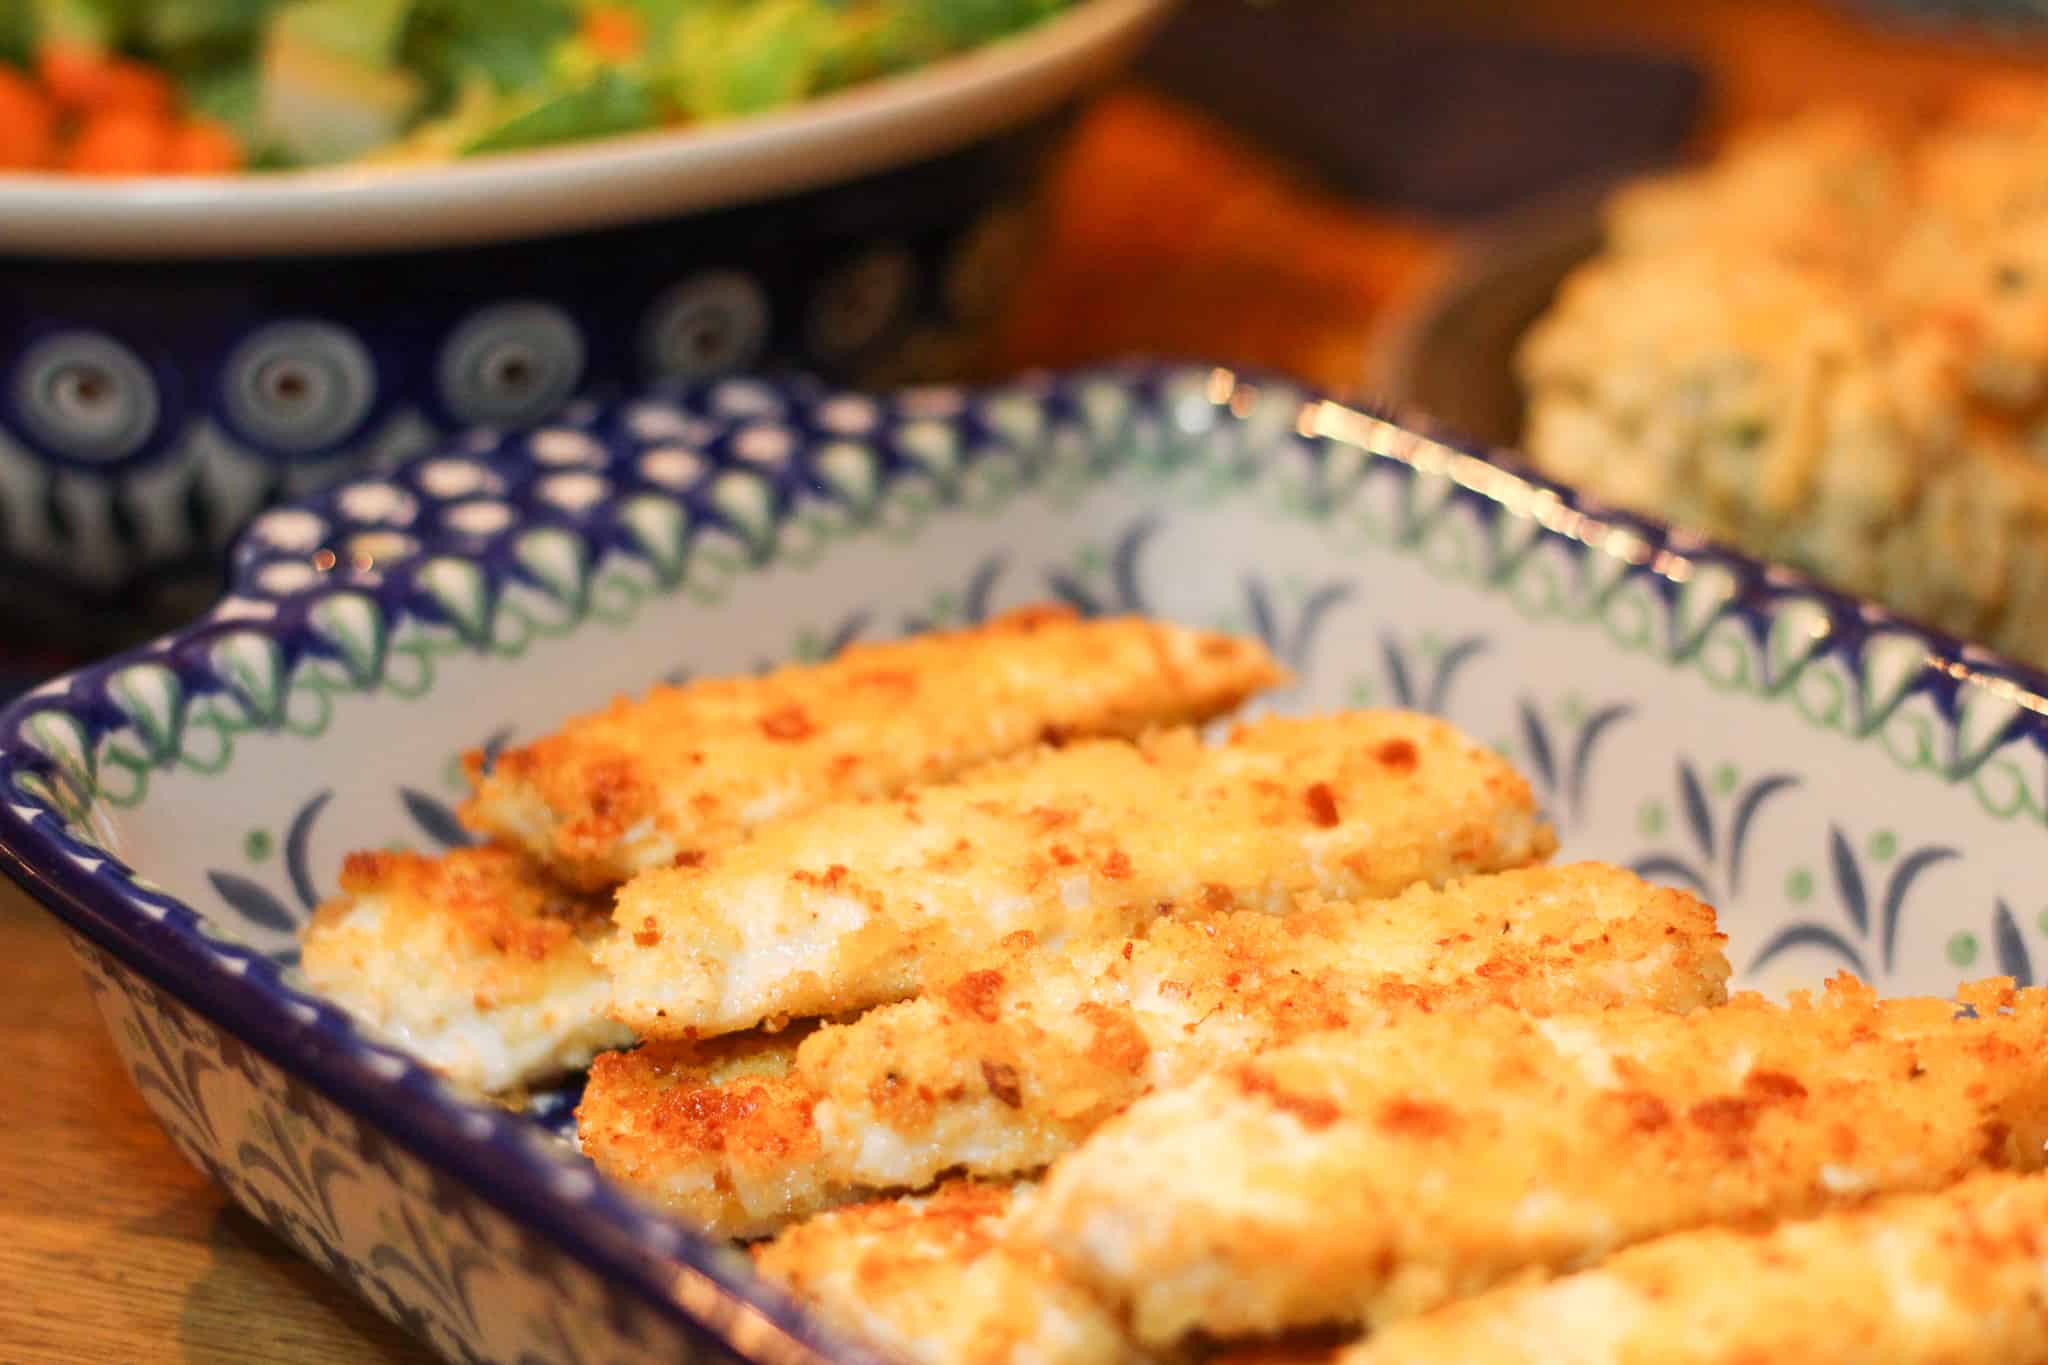 Pan-Fried Halibut with Sourdough Breadcrumbs